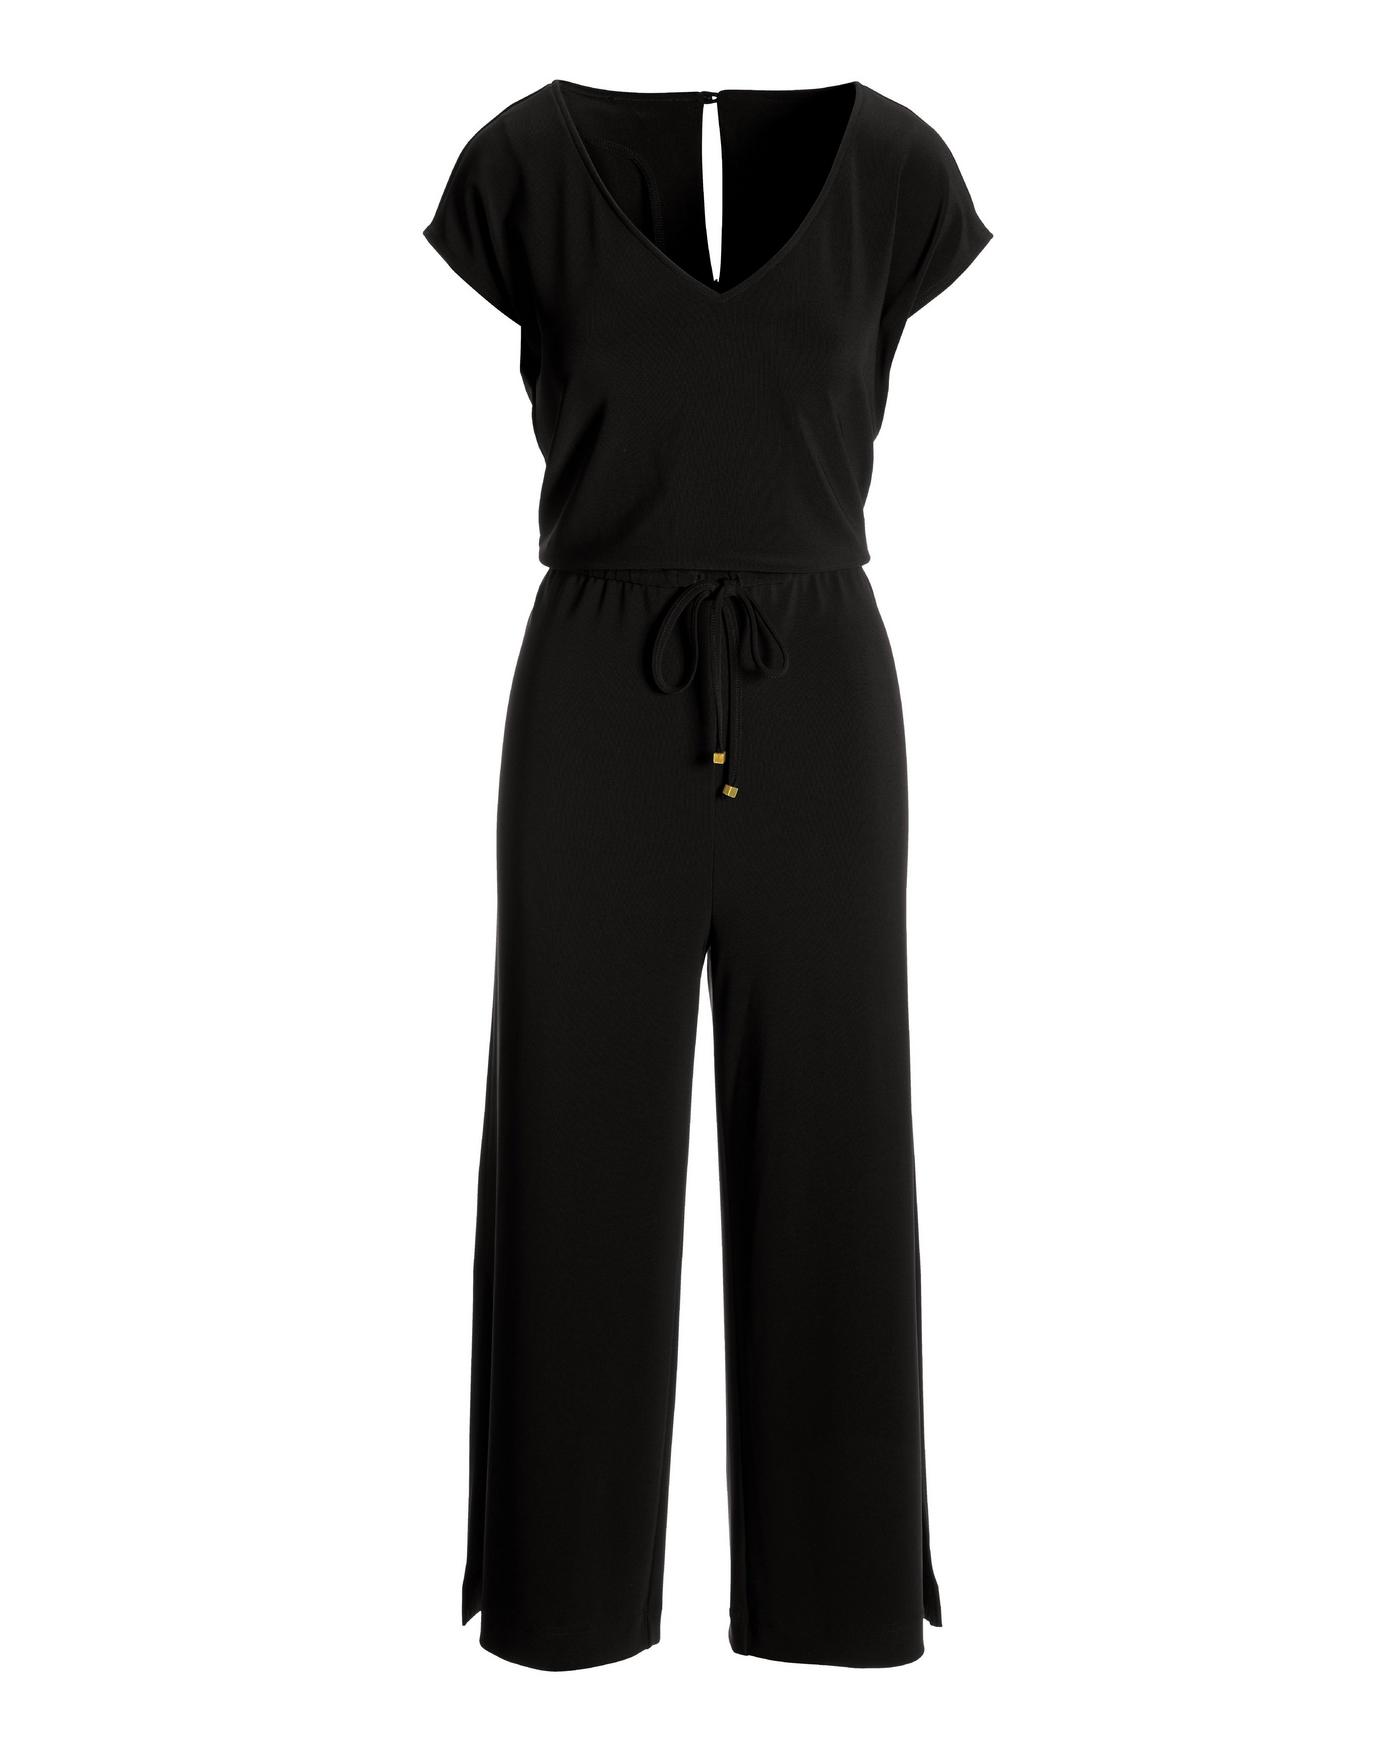 Beyond Sixteen Black Cycling Jumpsuit - 3050 60312 - Jumpsuit - Womens - -  by Beyond by St - Model